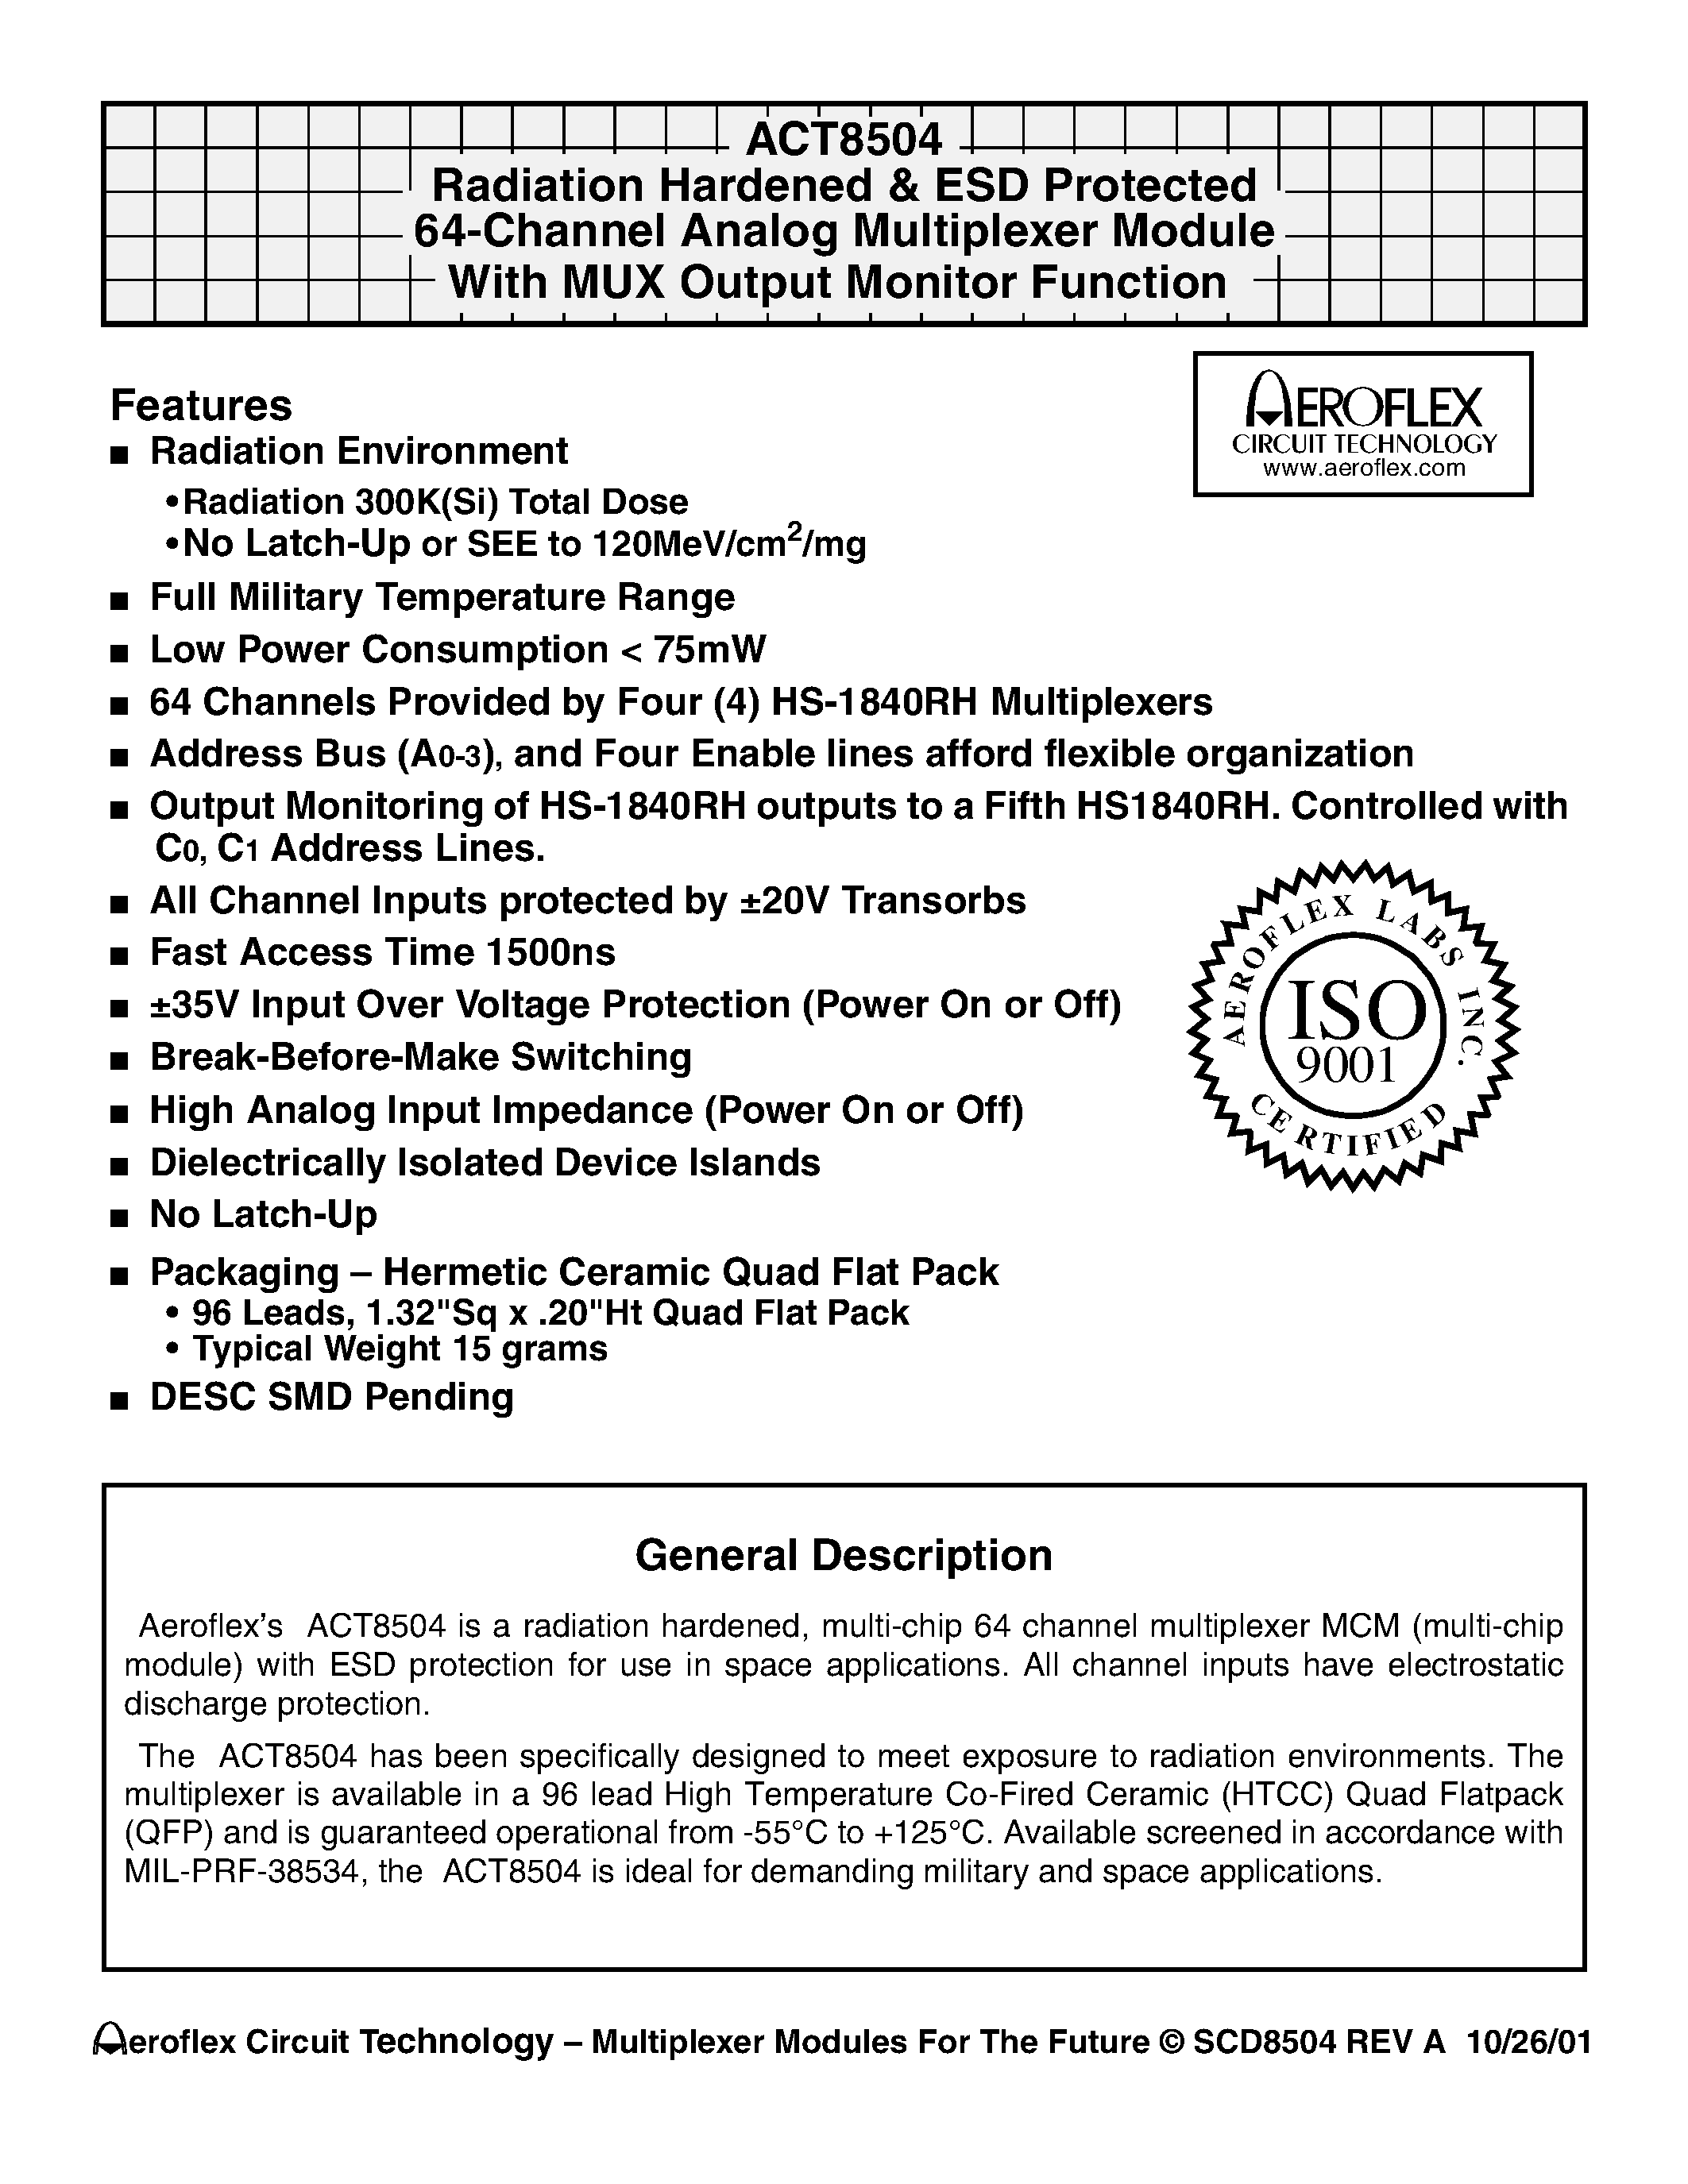 Datasheet ACT8504-I - ACT8504 Radiation Hardened & ESD Protected 64-Channel Analog Multiplexer Module With MUX Output Monitor Function page 1